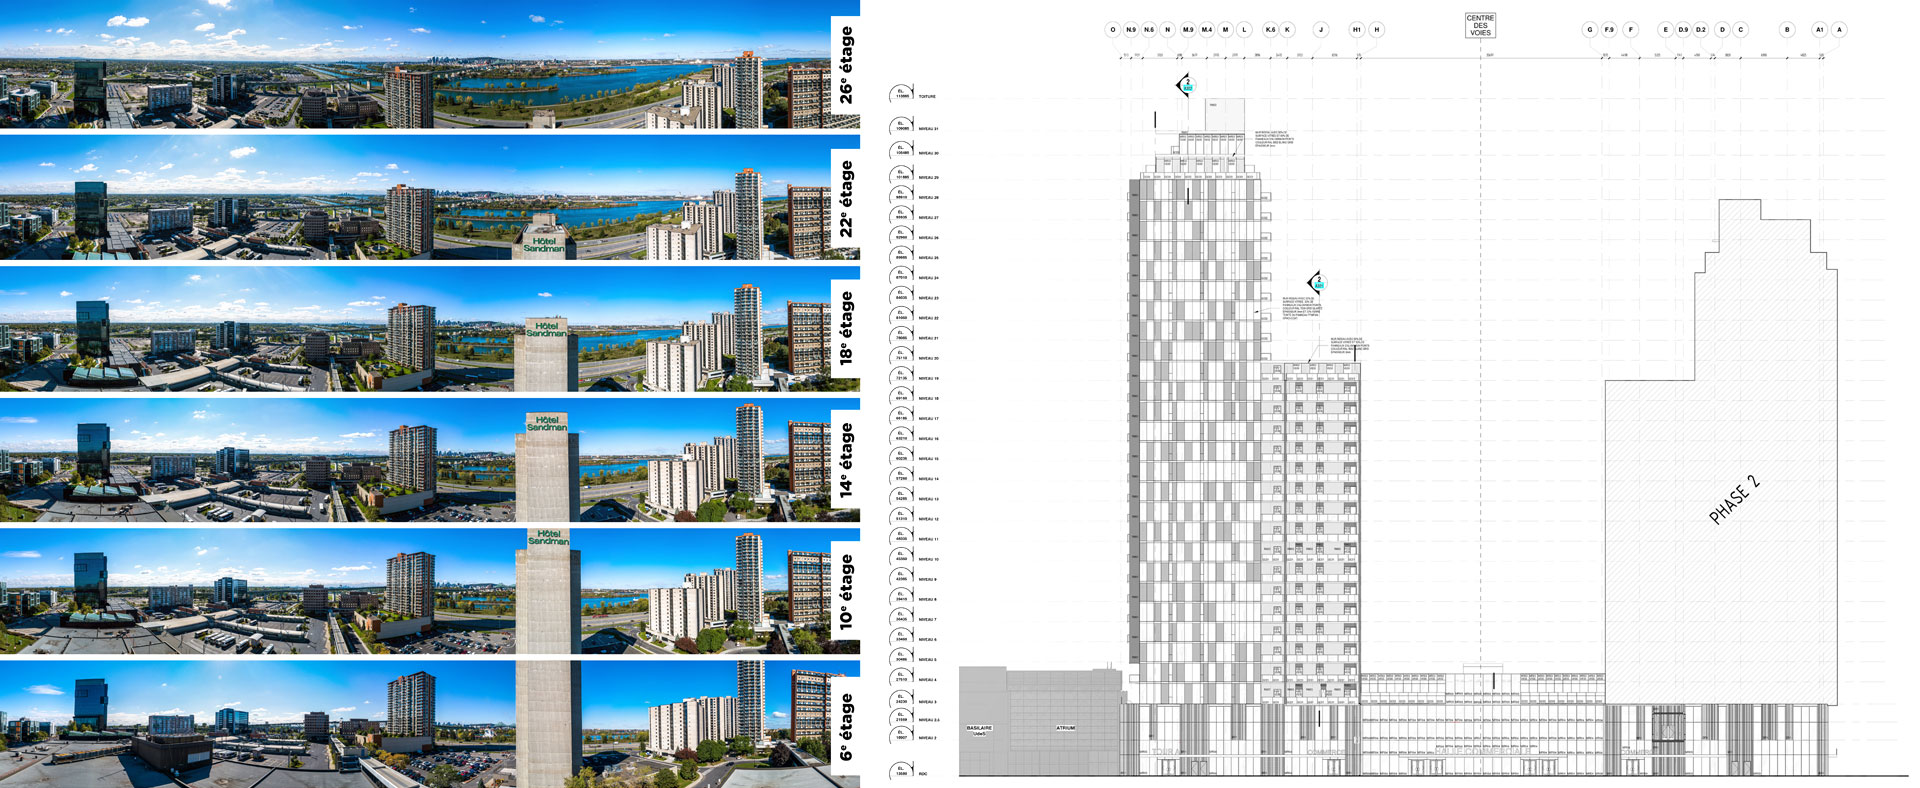 Panoramic views of each floor according to the builder's layout plans and elevations